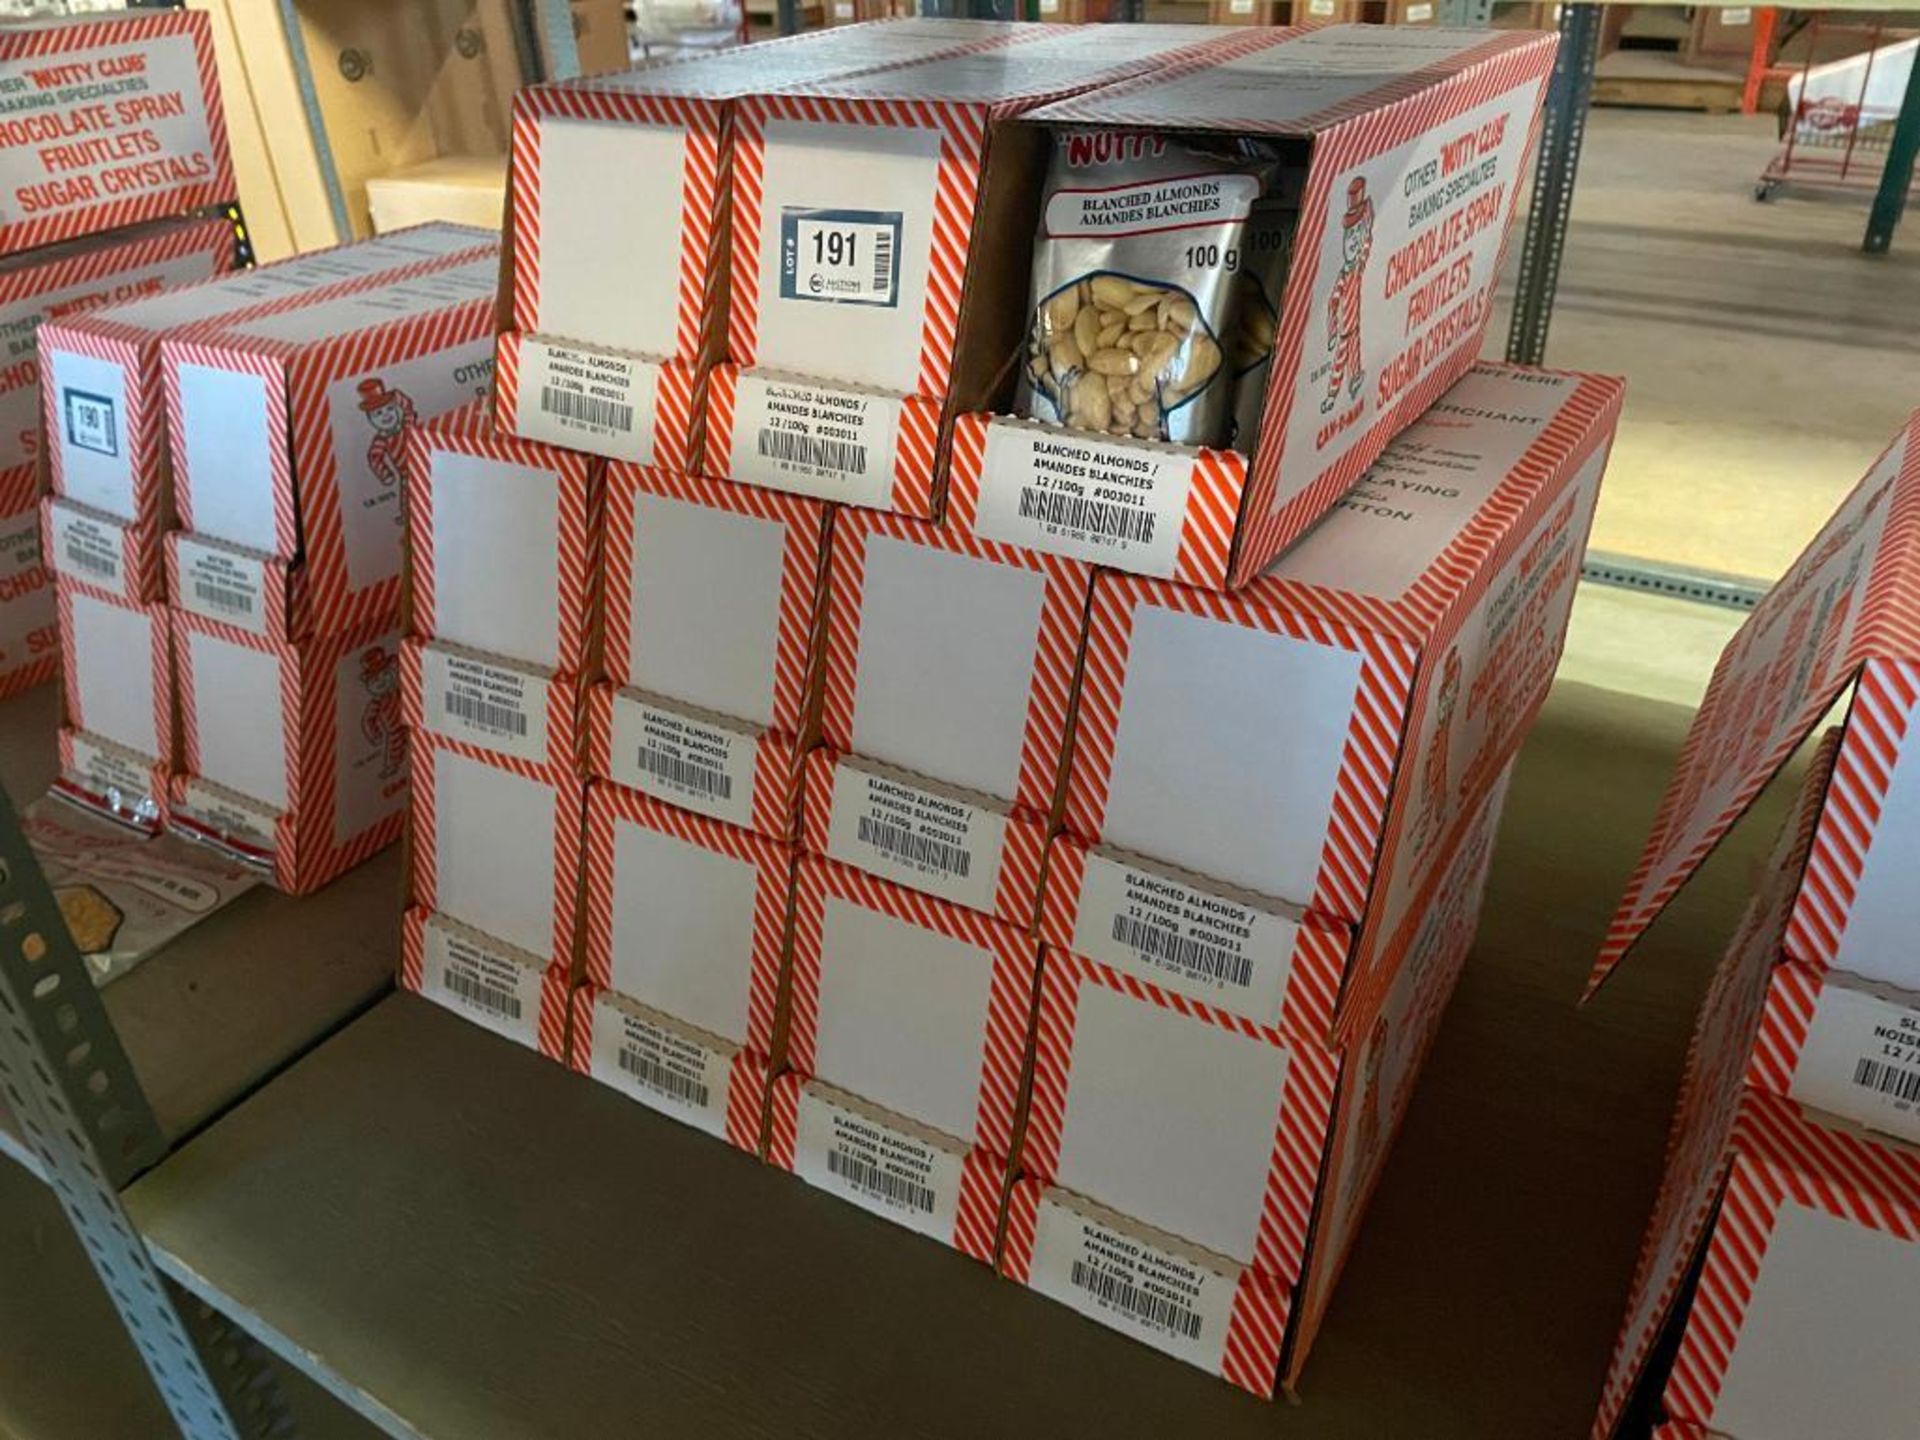 (11) BOXES OF NUTTY CLUB BLANCHED ALMONDS, 12/100G BAGS PER BOX - Image 3 of 3